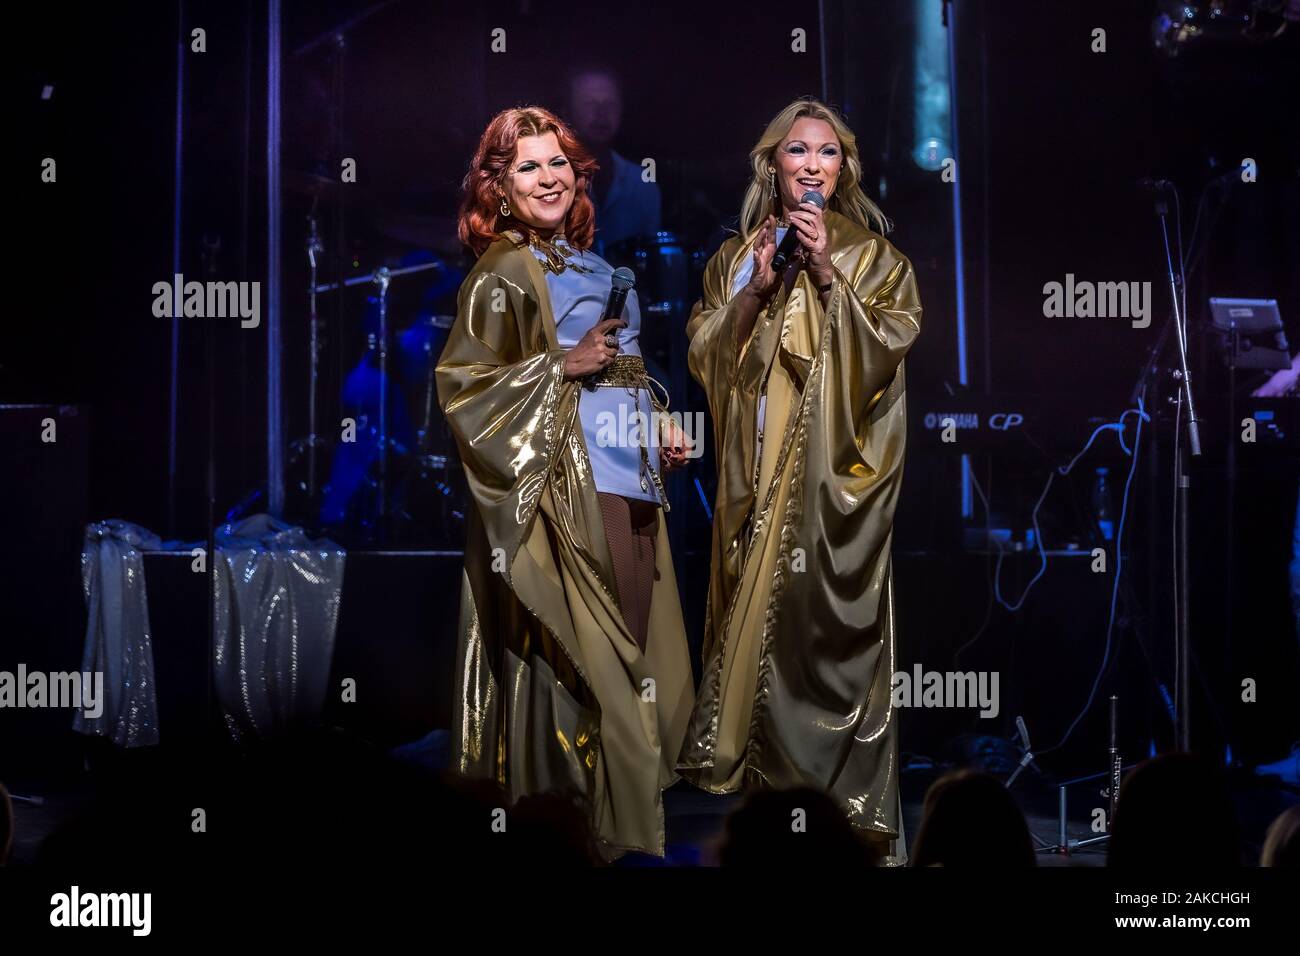 Odense, Denmark. 07th, November 2019. The international acclaimed Abba tribute show The Show - a Tribute to Abba is running at Odeon in Odense. Here singers Camilla Dahlin (R) and Katja Nord (L) are seen live on stage. (Photo credit: Gonzales Photo - Camilla Lundbye). Stock Photo